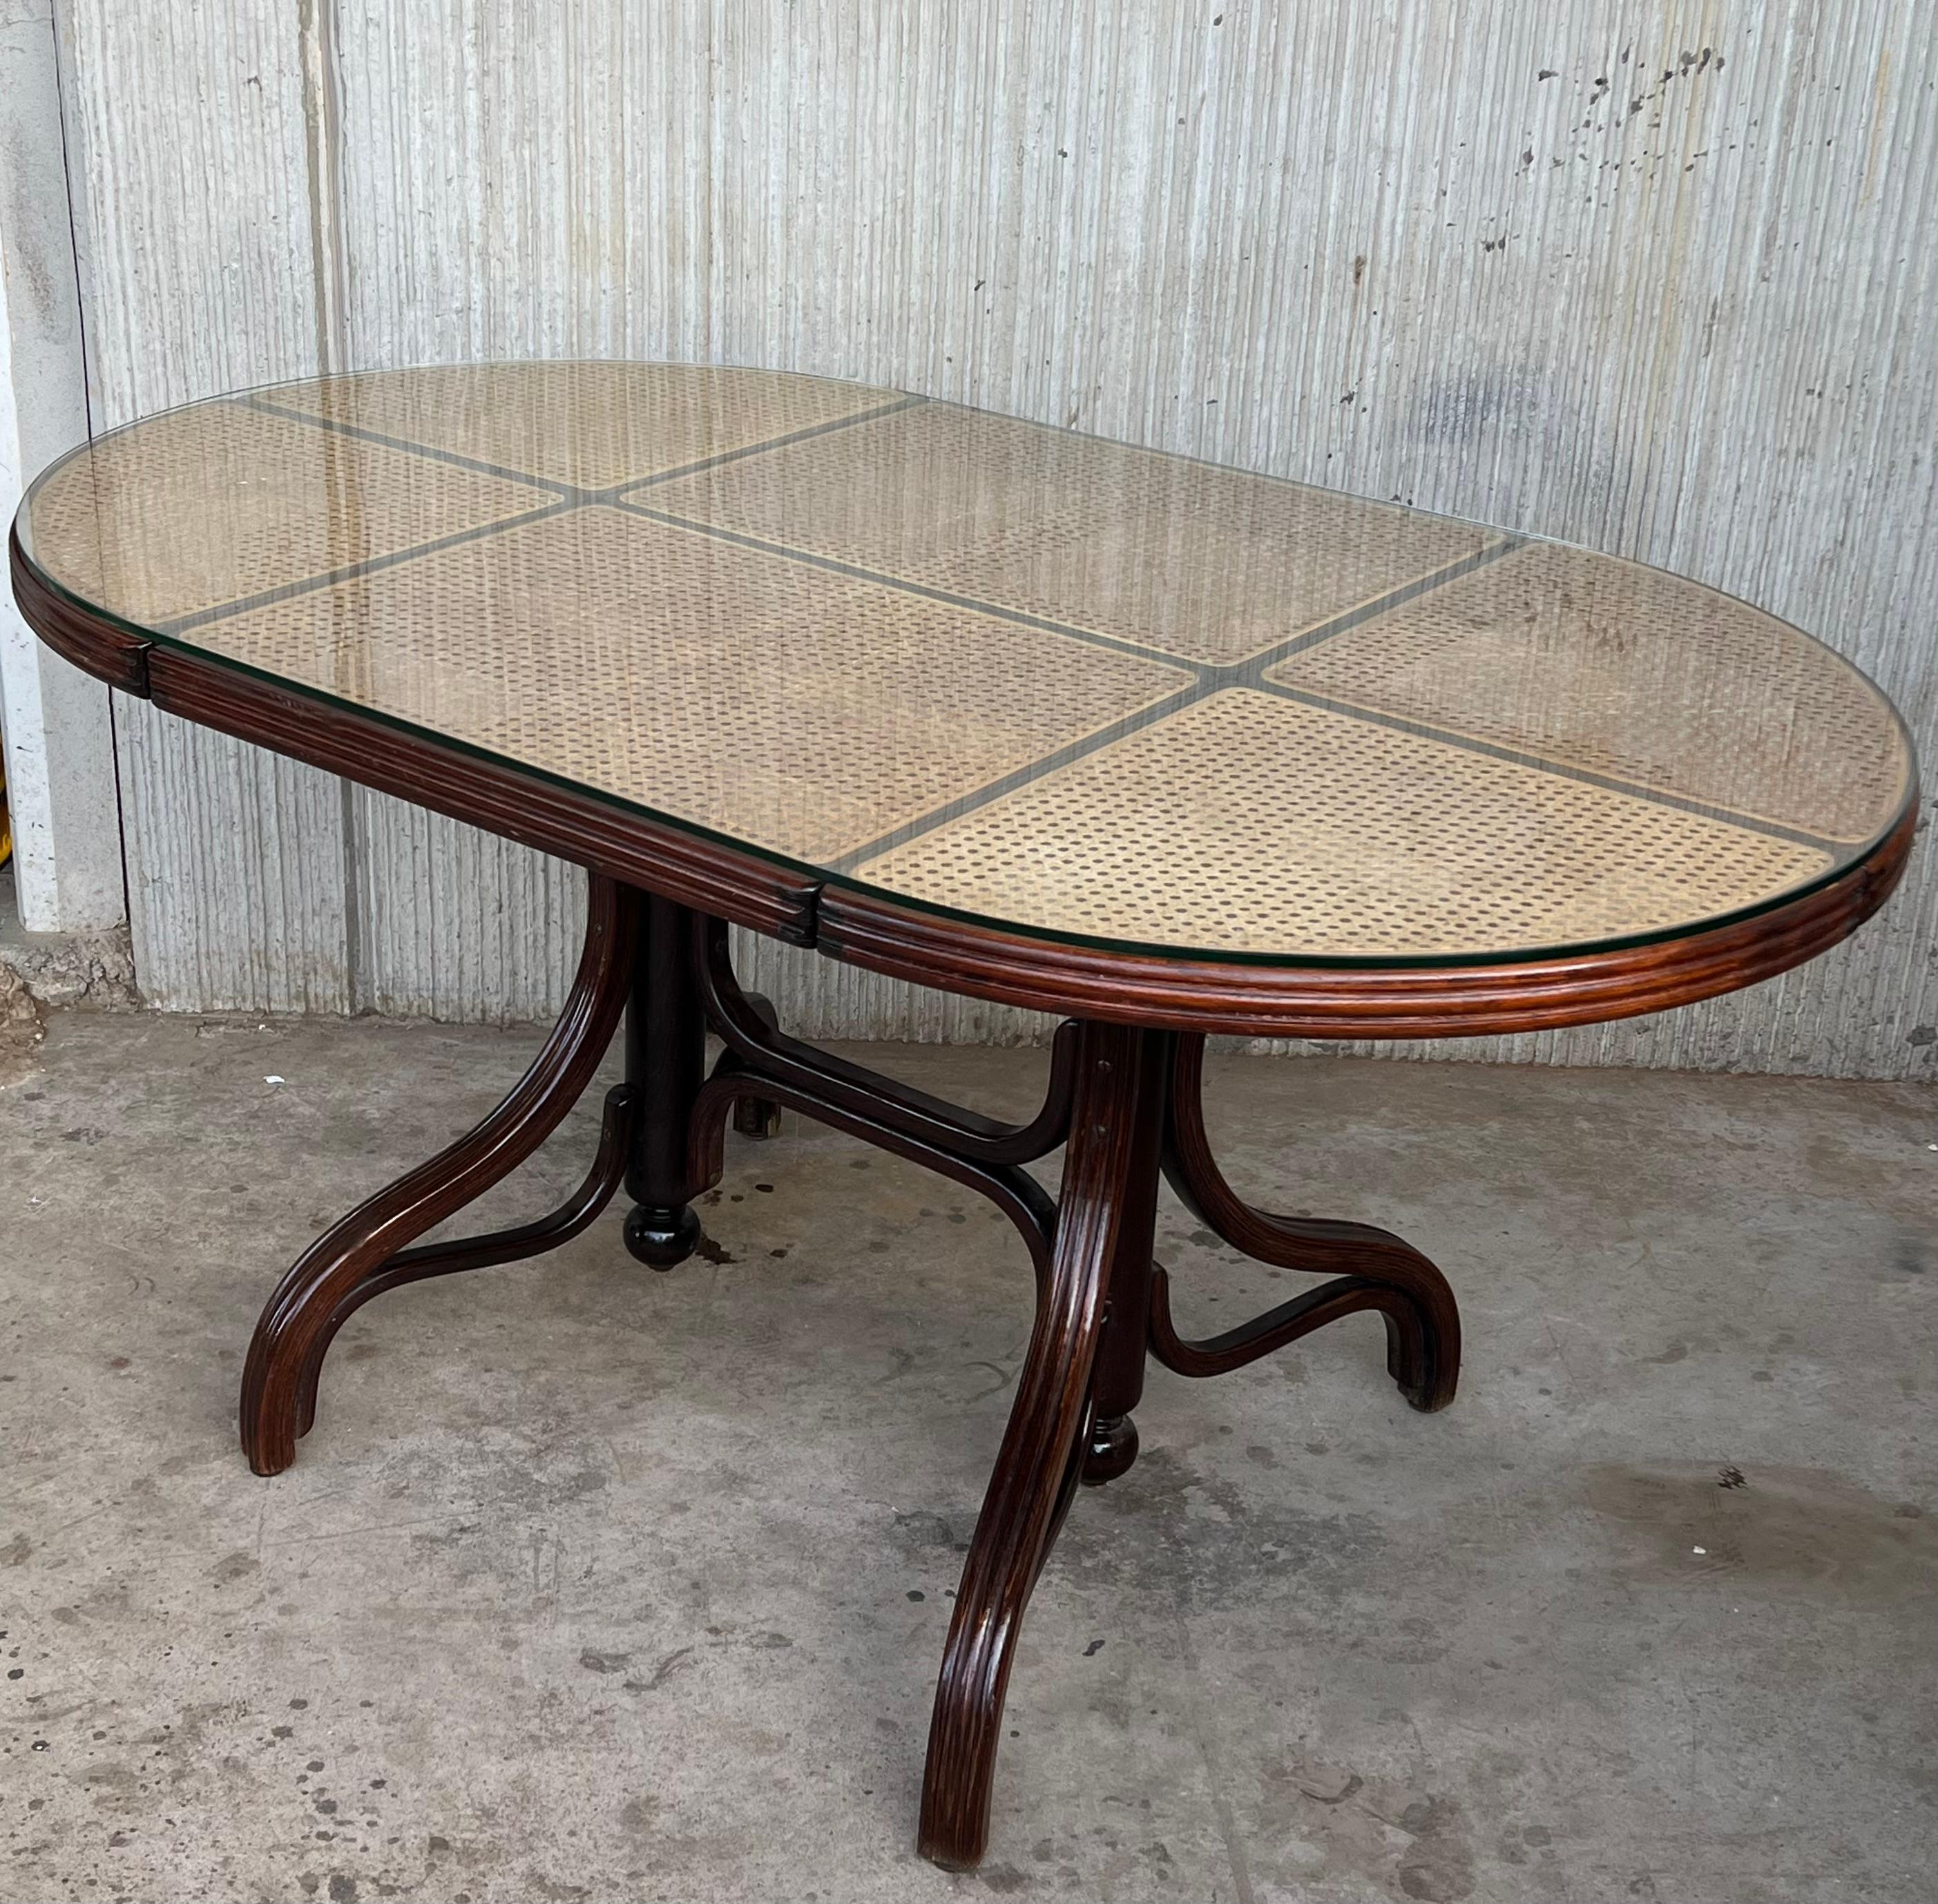 Oval dining table in wood, top cane and glass, Germany, 1970s.